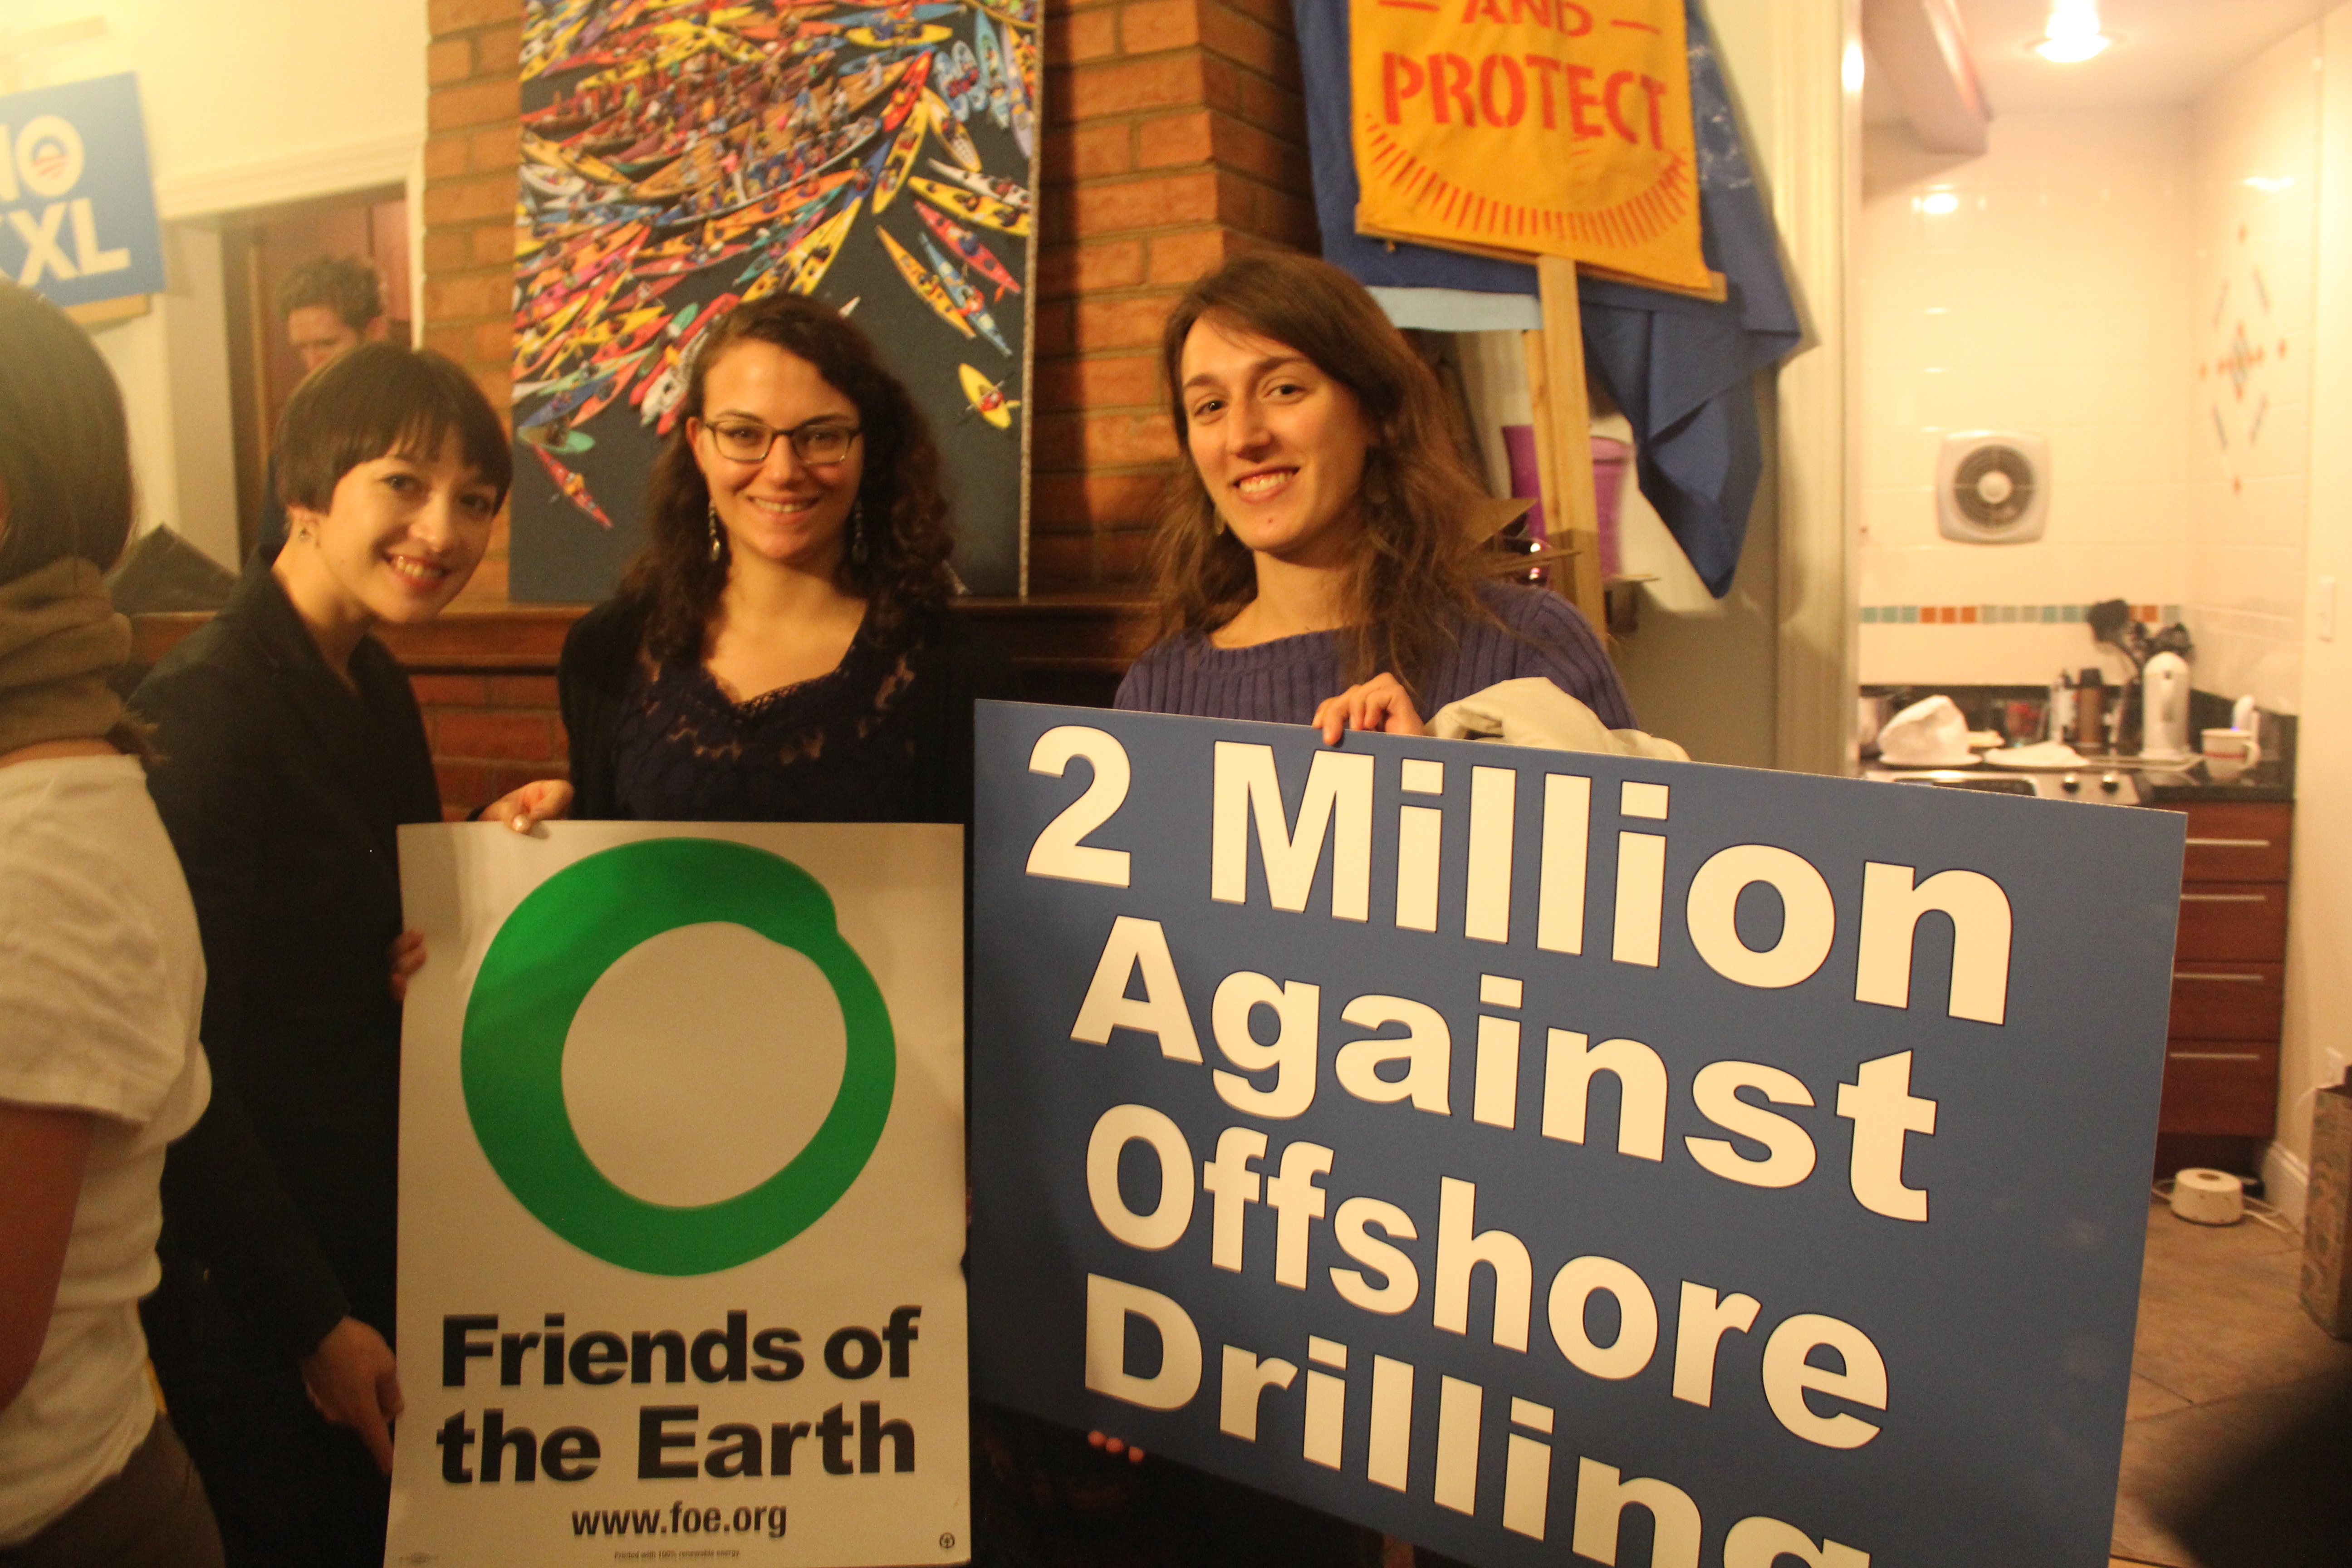 Friends of the Earth campaigners help deliver 2 million petitions.